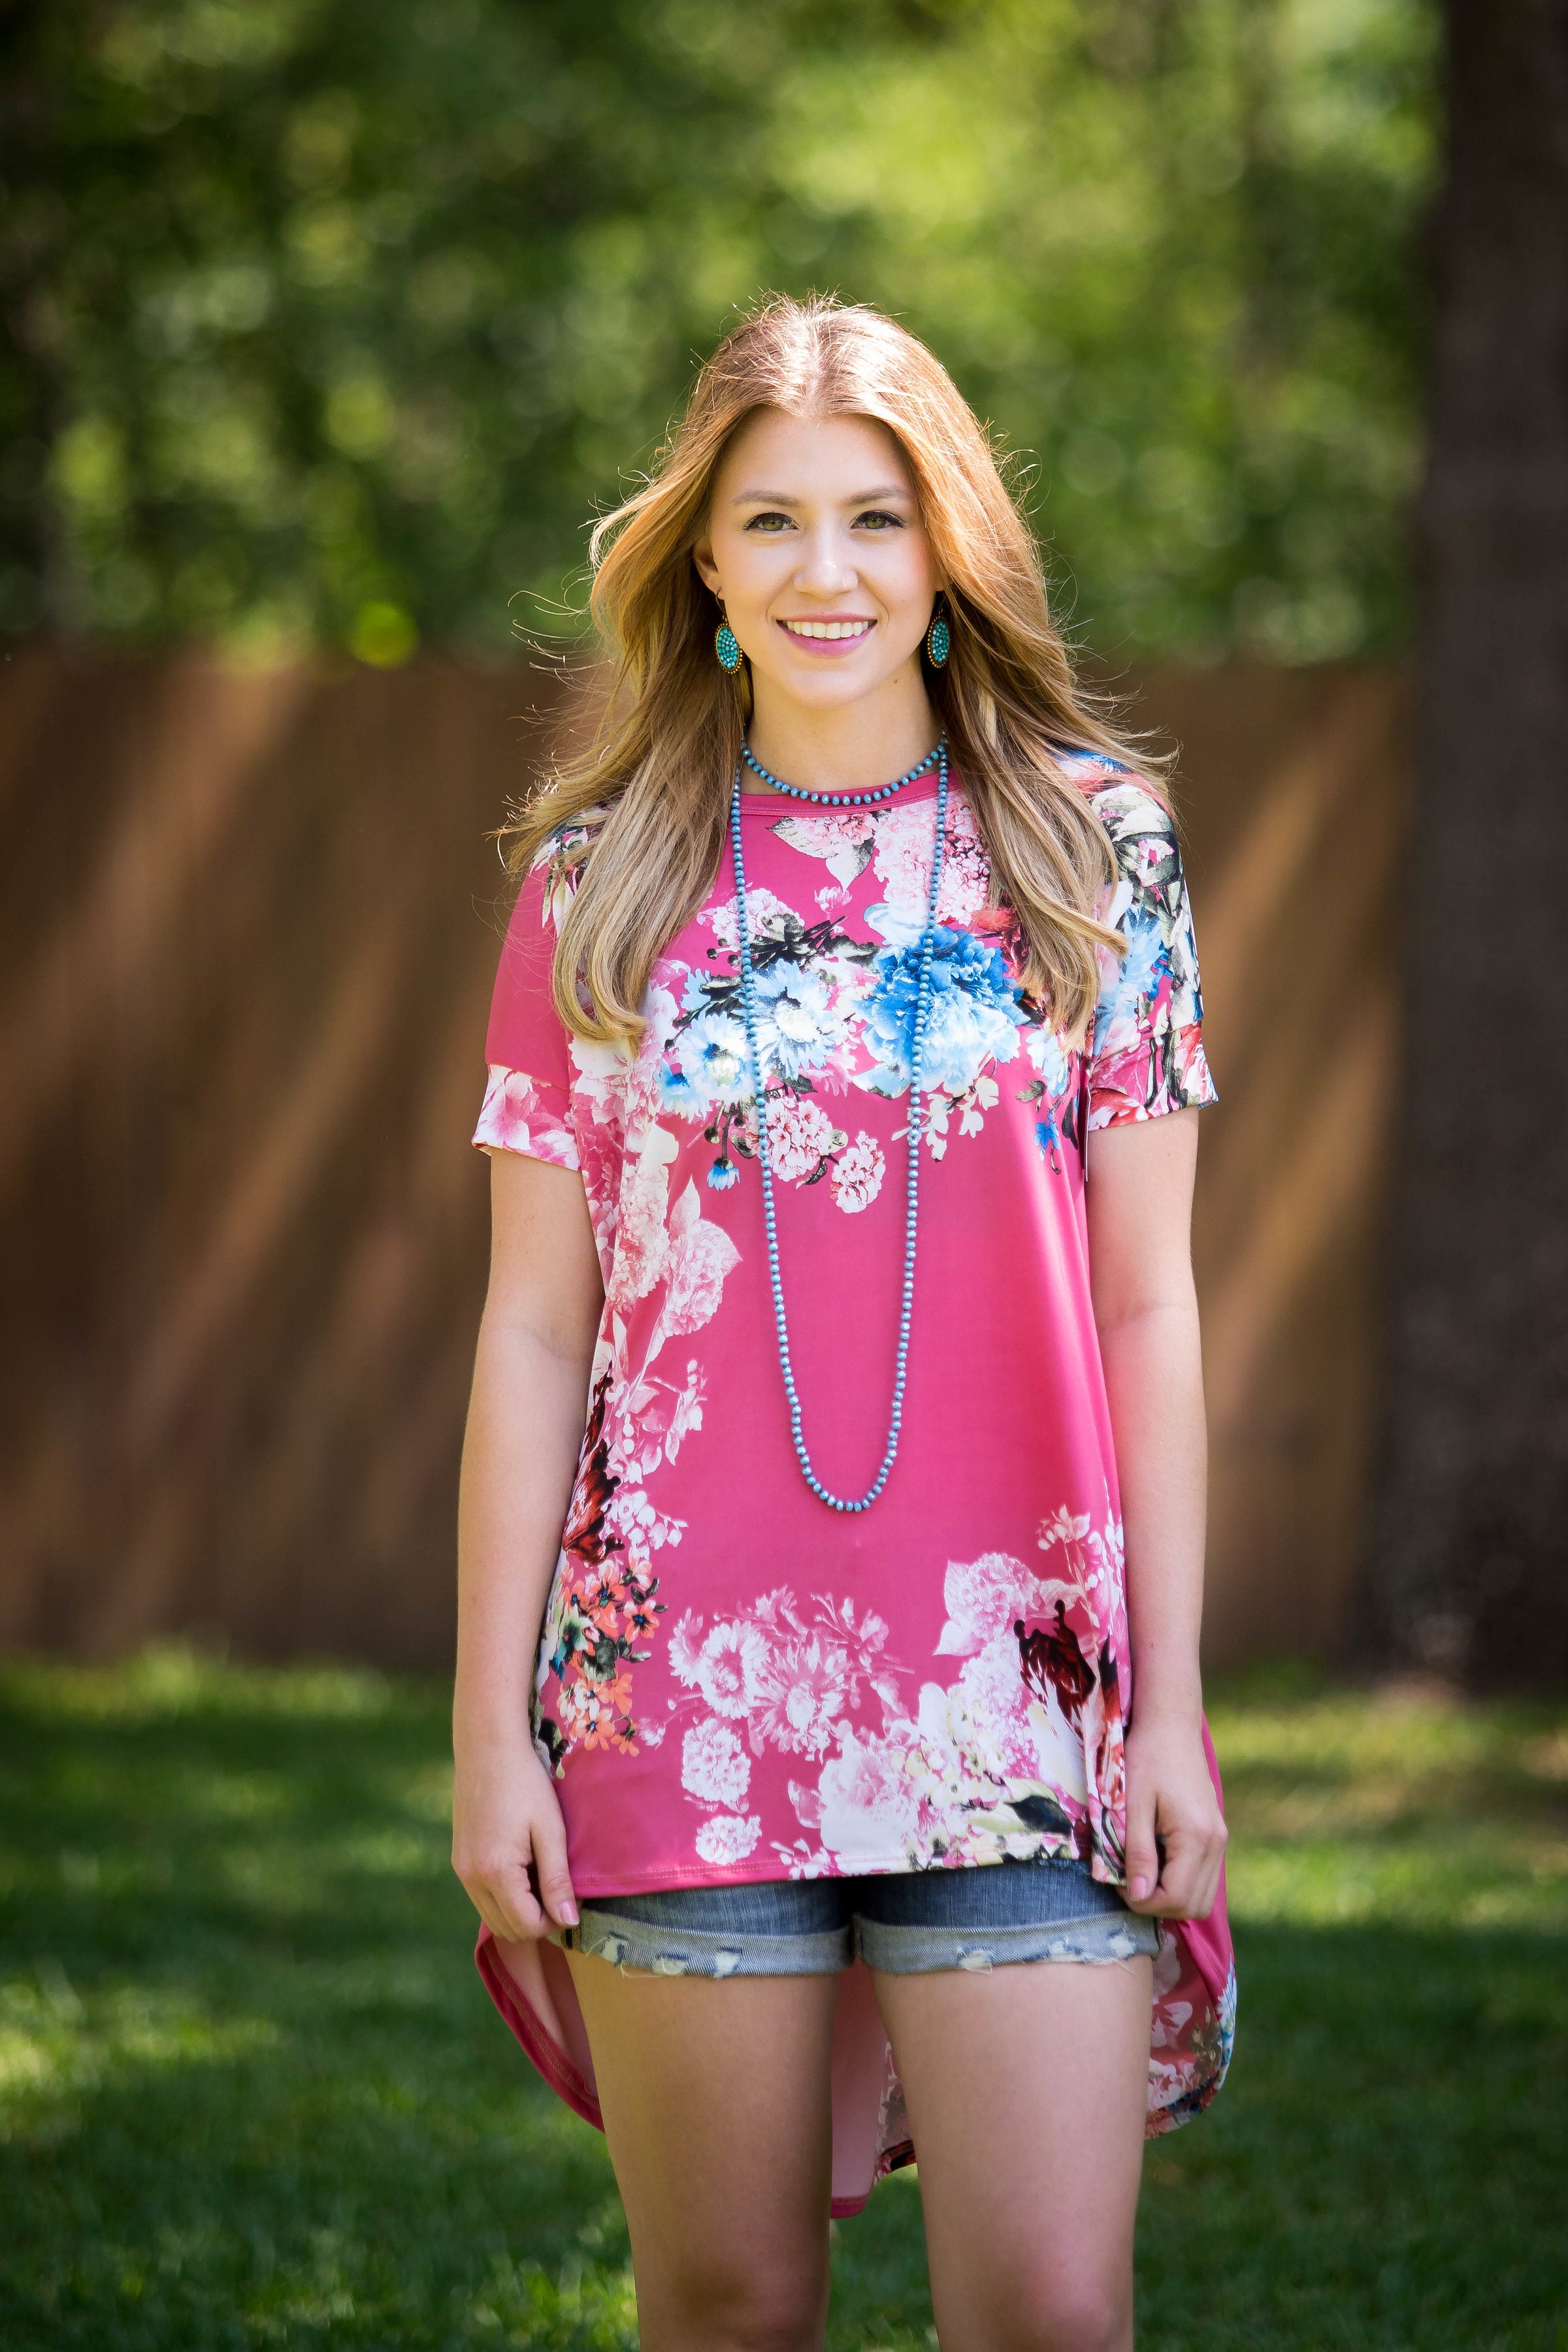 Last Chance Size S & M | Something You Never Had Floral High-Low Tunic in Pink - Giddy Up Glamour Boutique